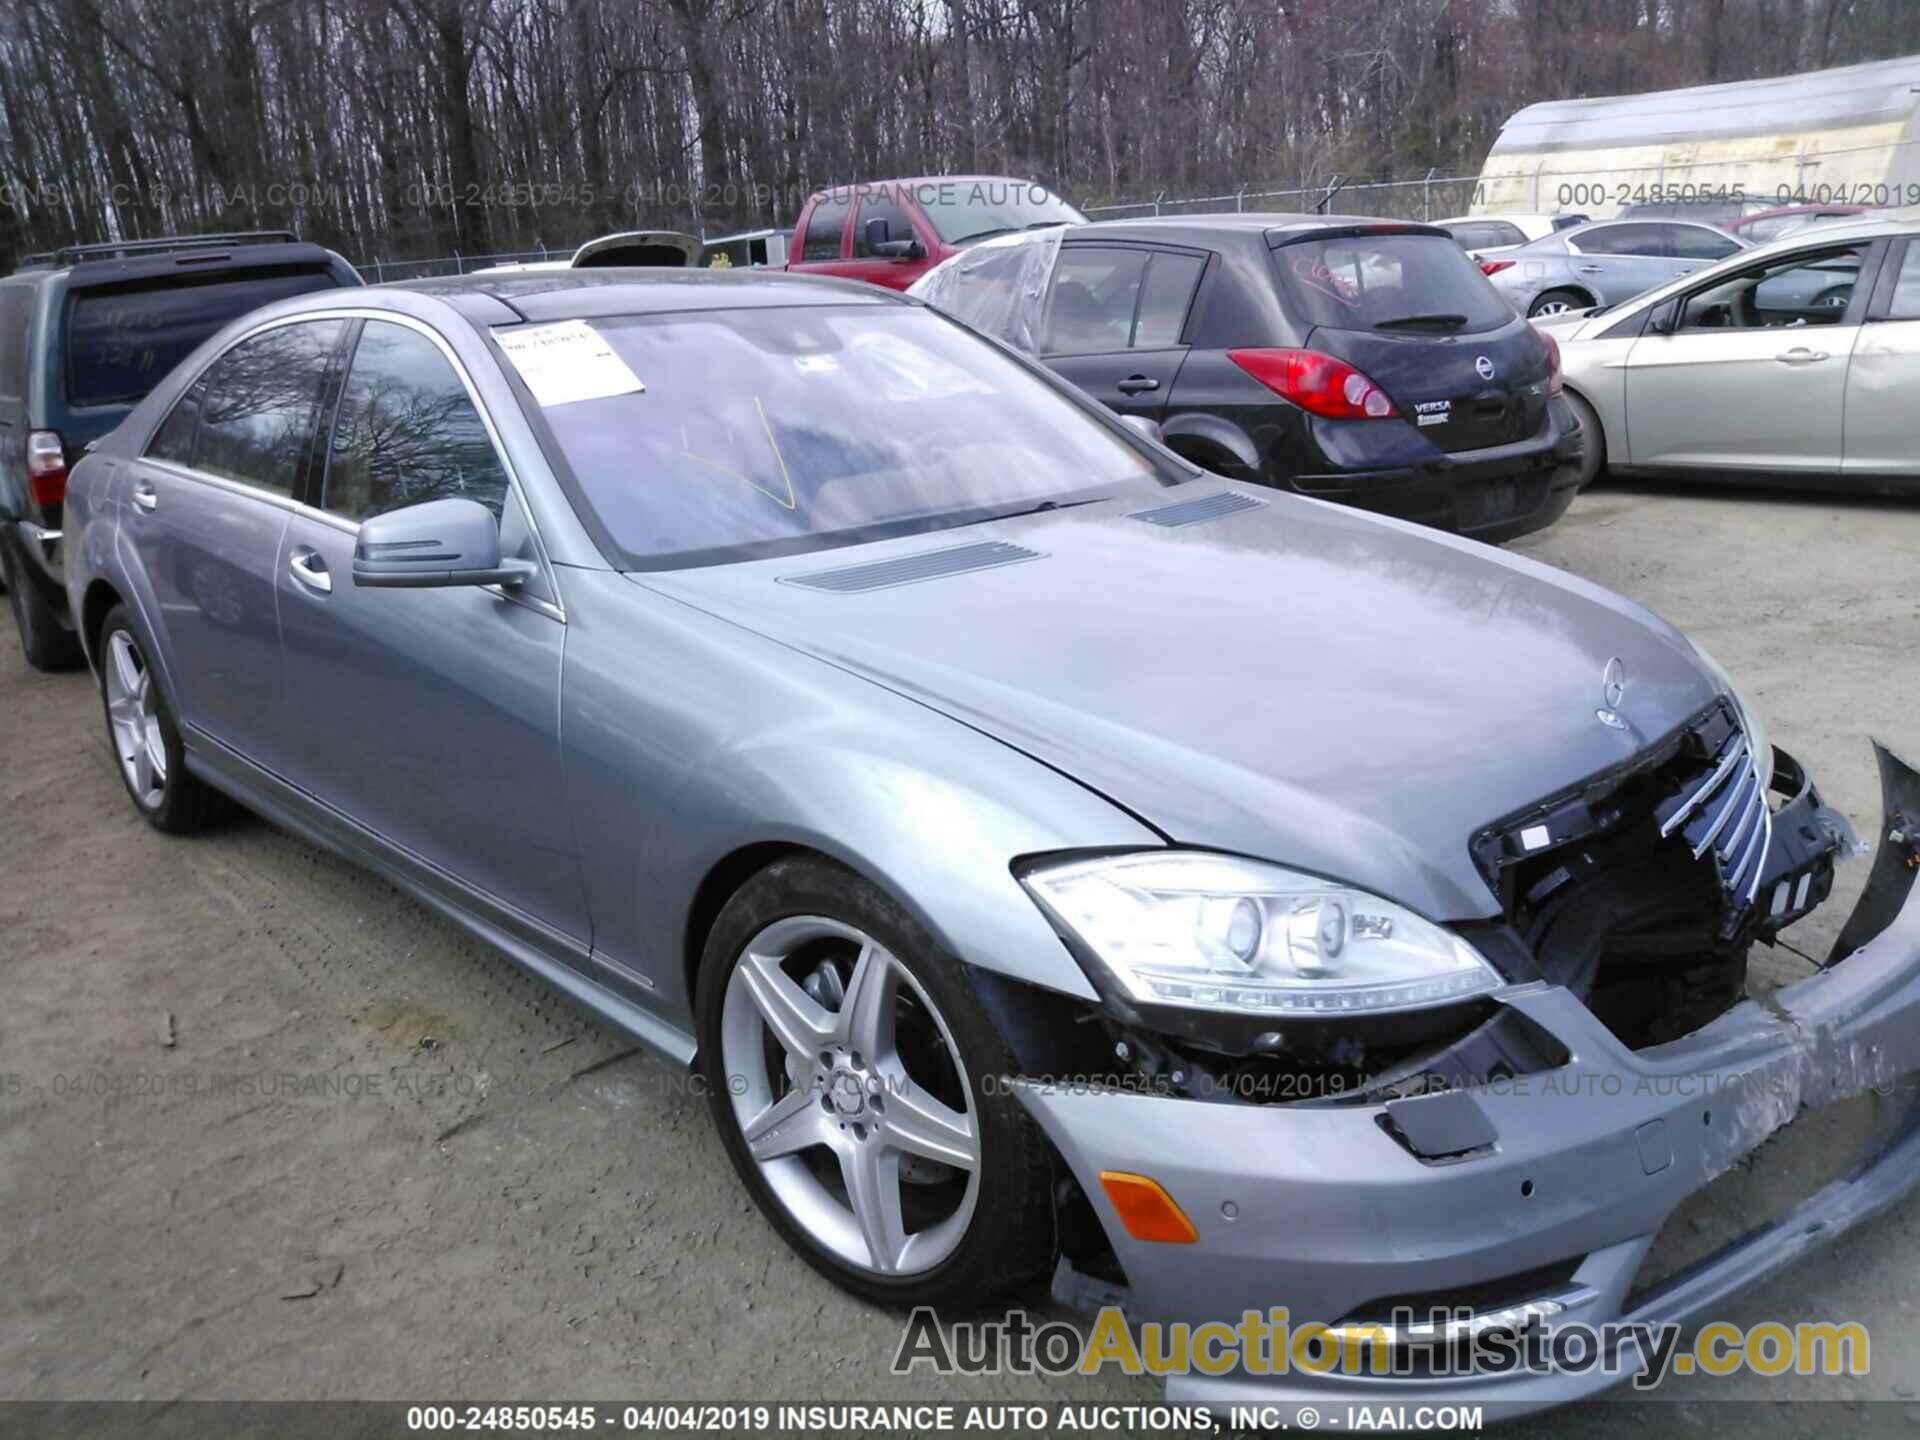 MERCEDES-BENZ S, WDDNG8GBXAA312089